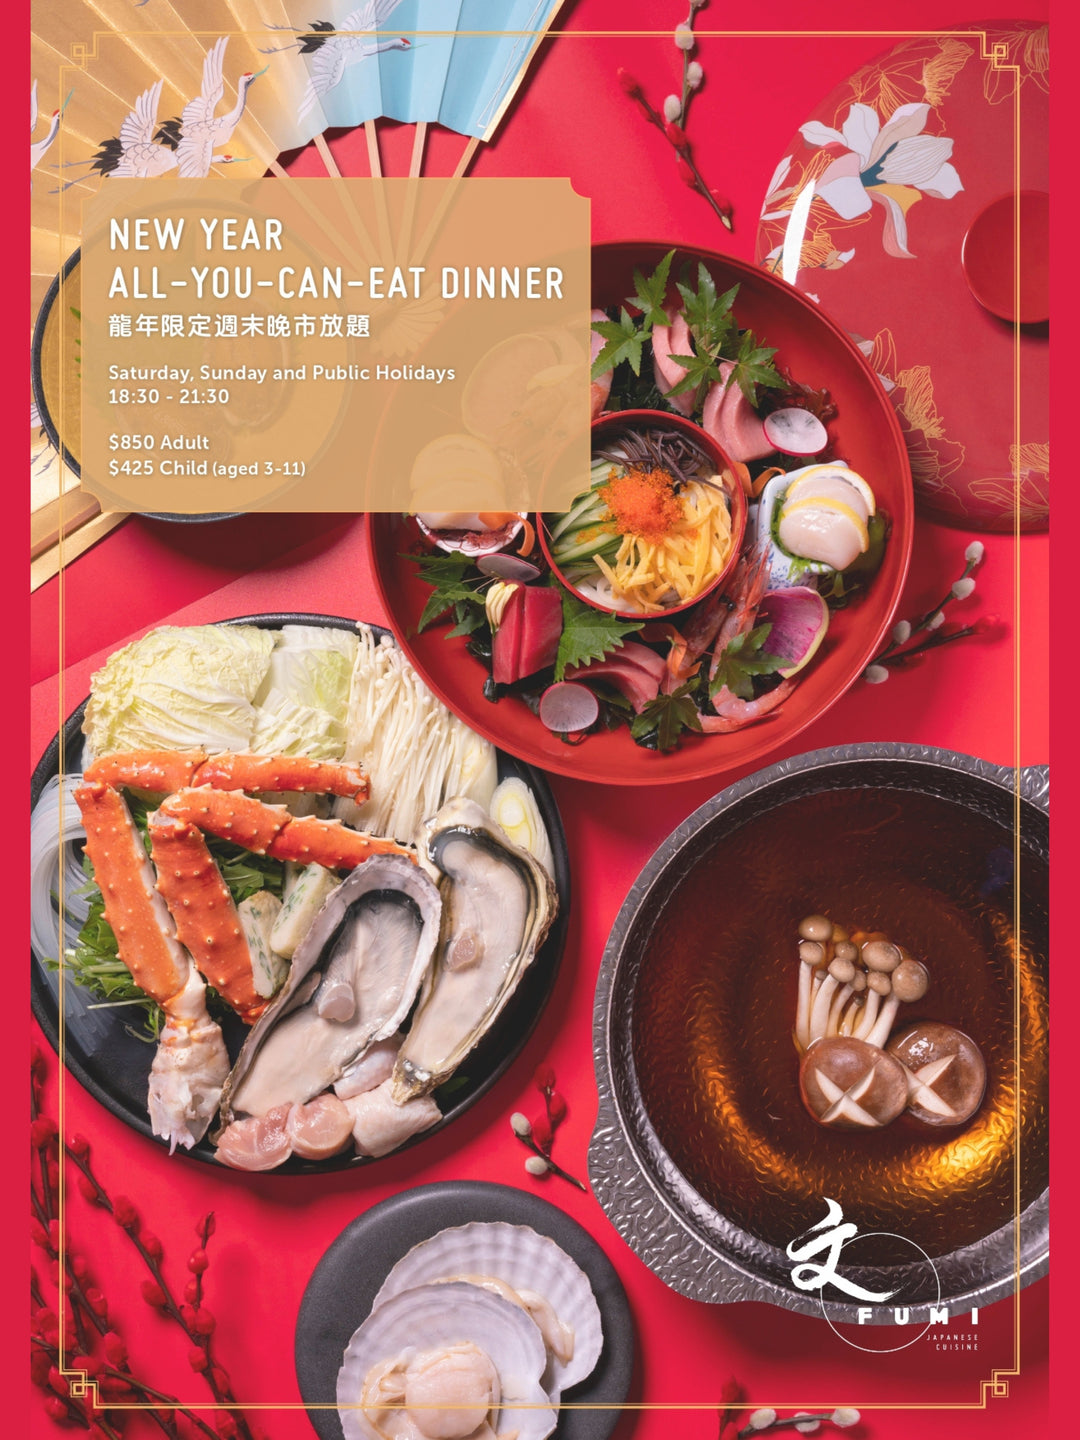 FUMI CNY Special: ALL-YOU-CAN-EAT DINNER (10% OFF) [DEPOSIT]